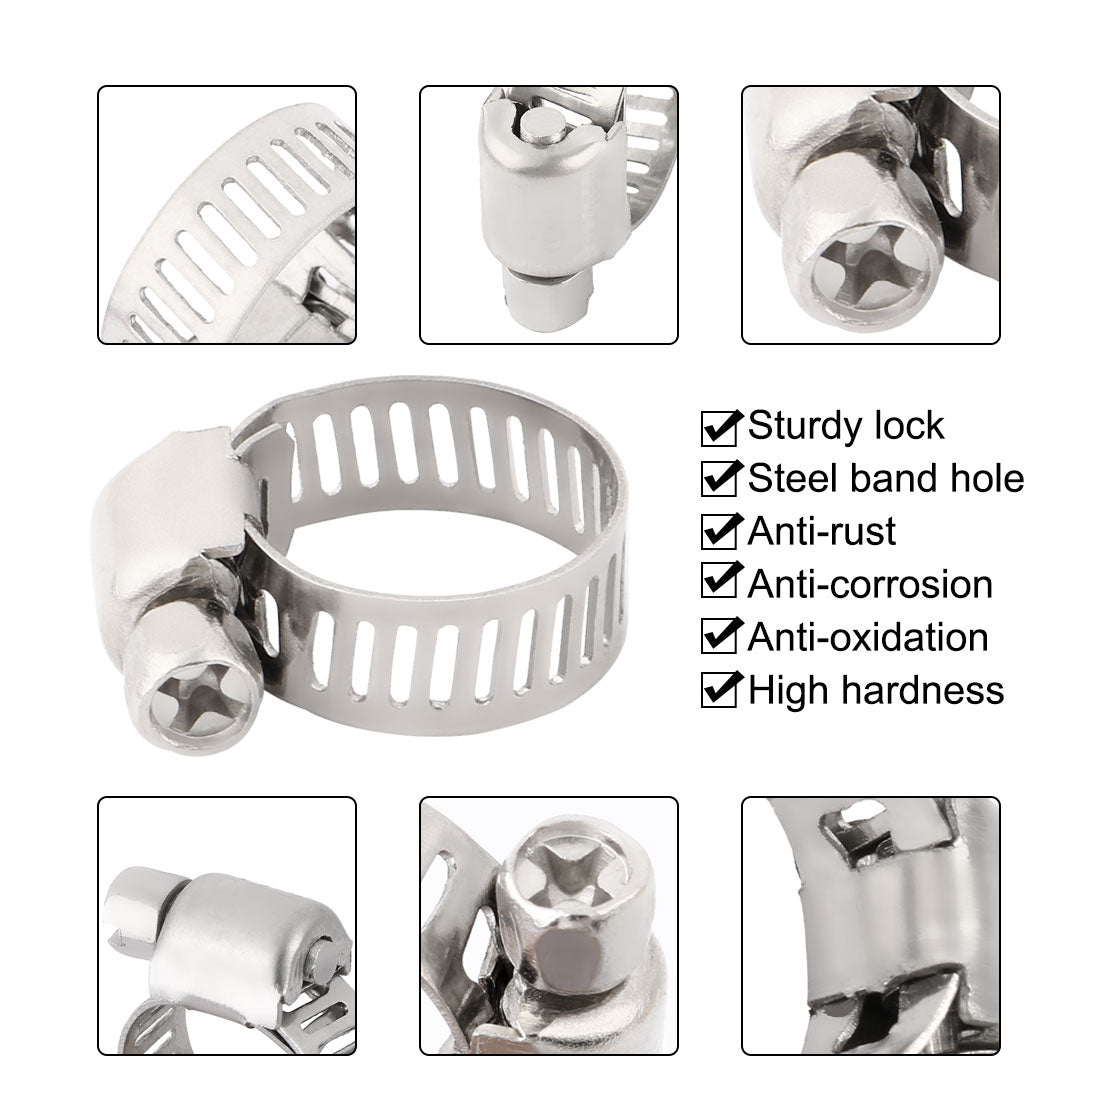 uxcell Uxcell 3/8-5/8 Inch Dia 10pcs Steel Adjustable  Gear Clip Clamping Range Hose Clamp